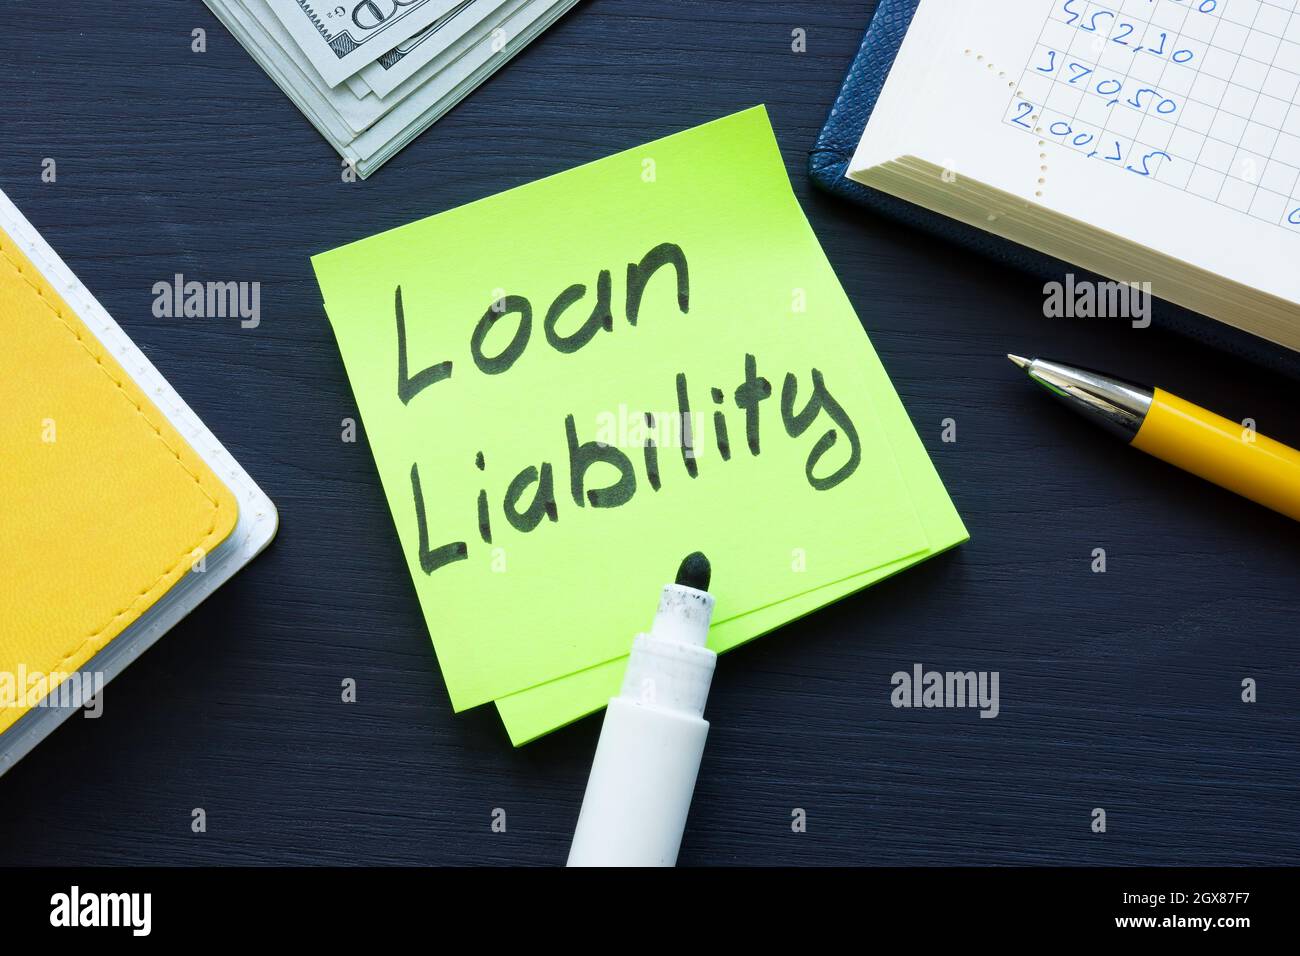 Loan liability memo and cash on the desk. Stock Photo